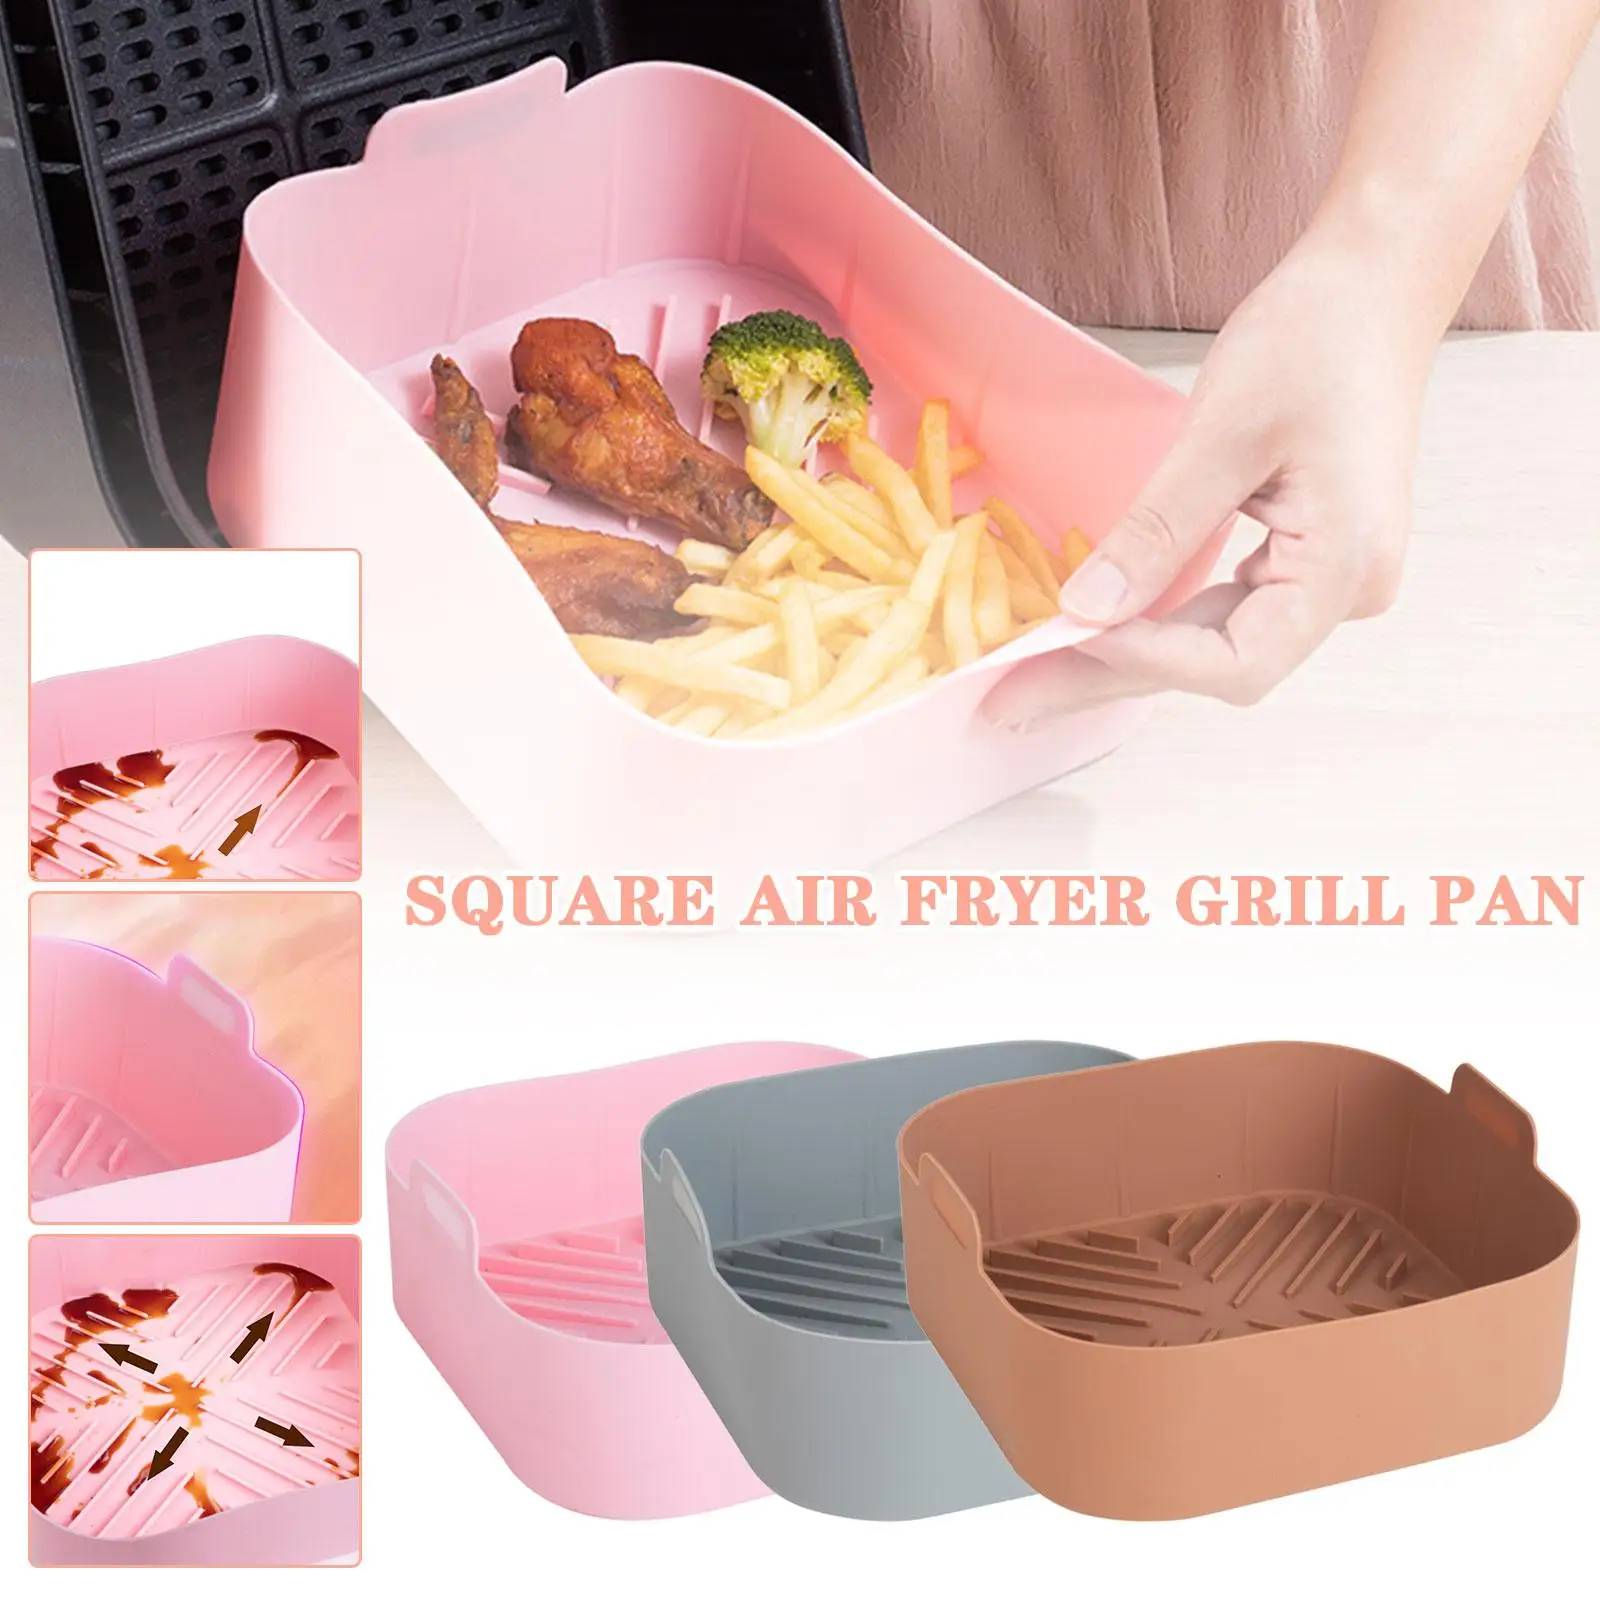 

21CM BBQ Barbecue Pad Silicone Air Fryer Pot TrayPlate Airfryer Oven Baking Mold Pot Food Safe Reusable Kitchen Accessory